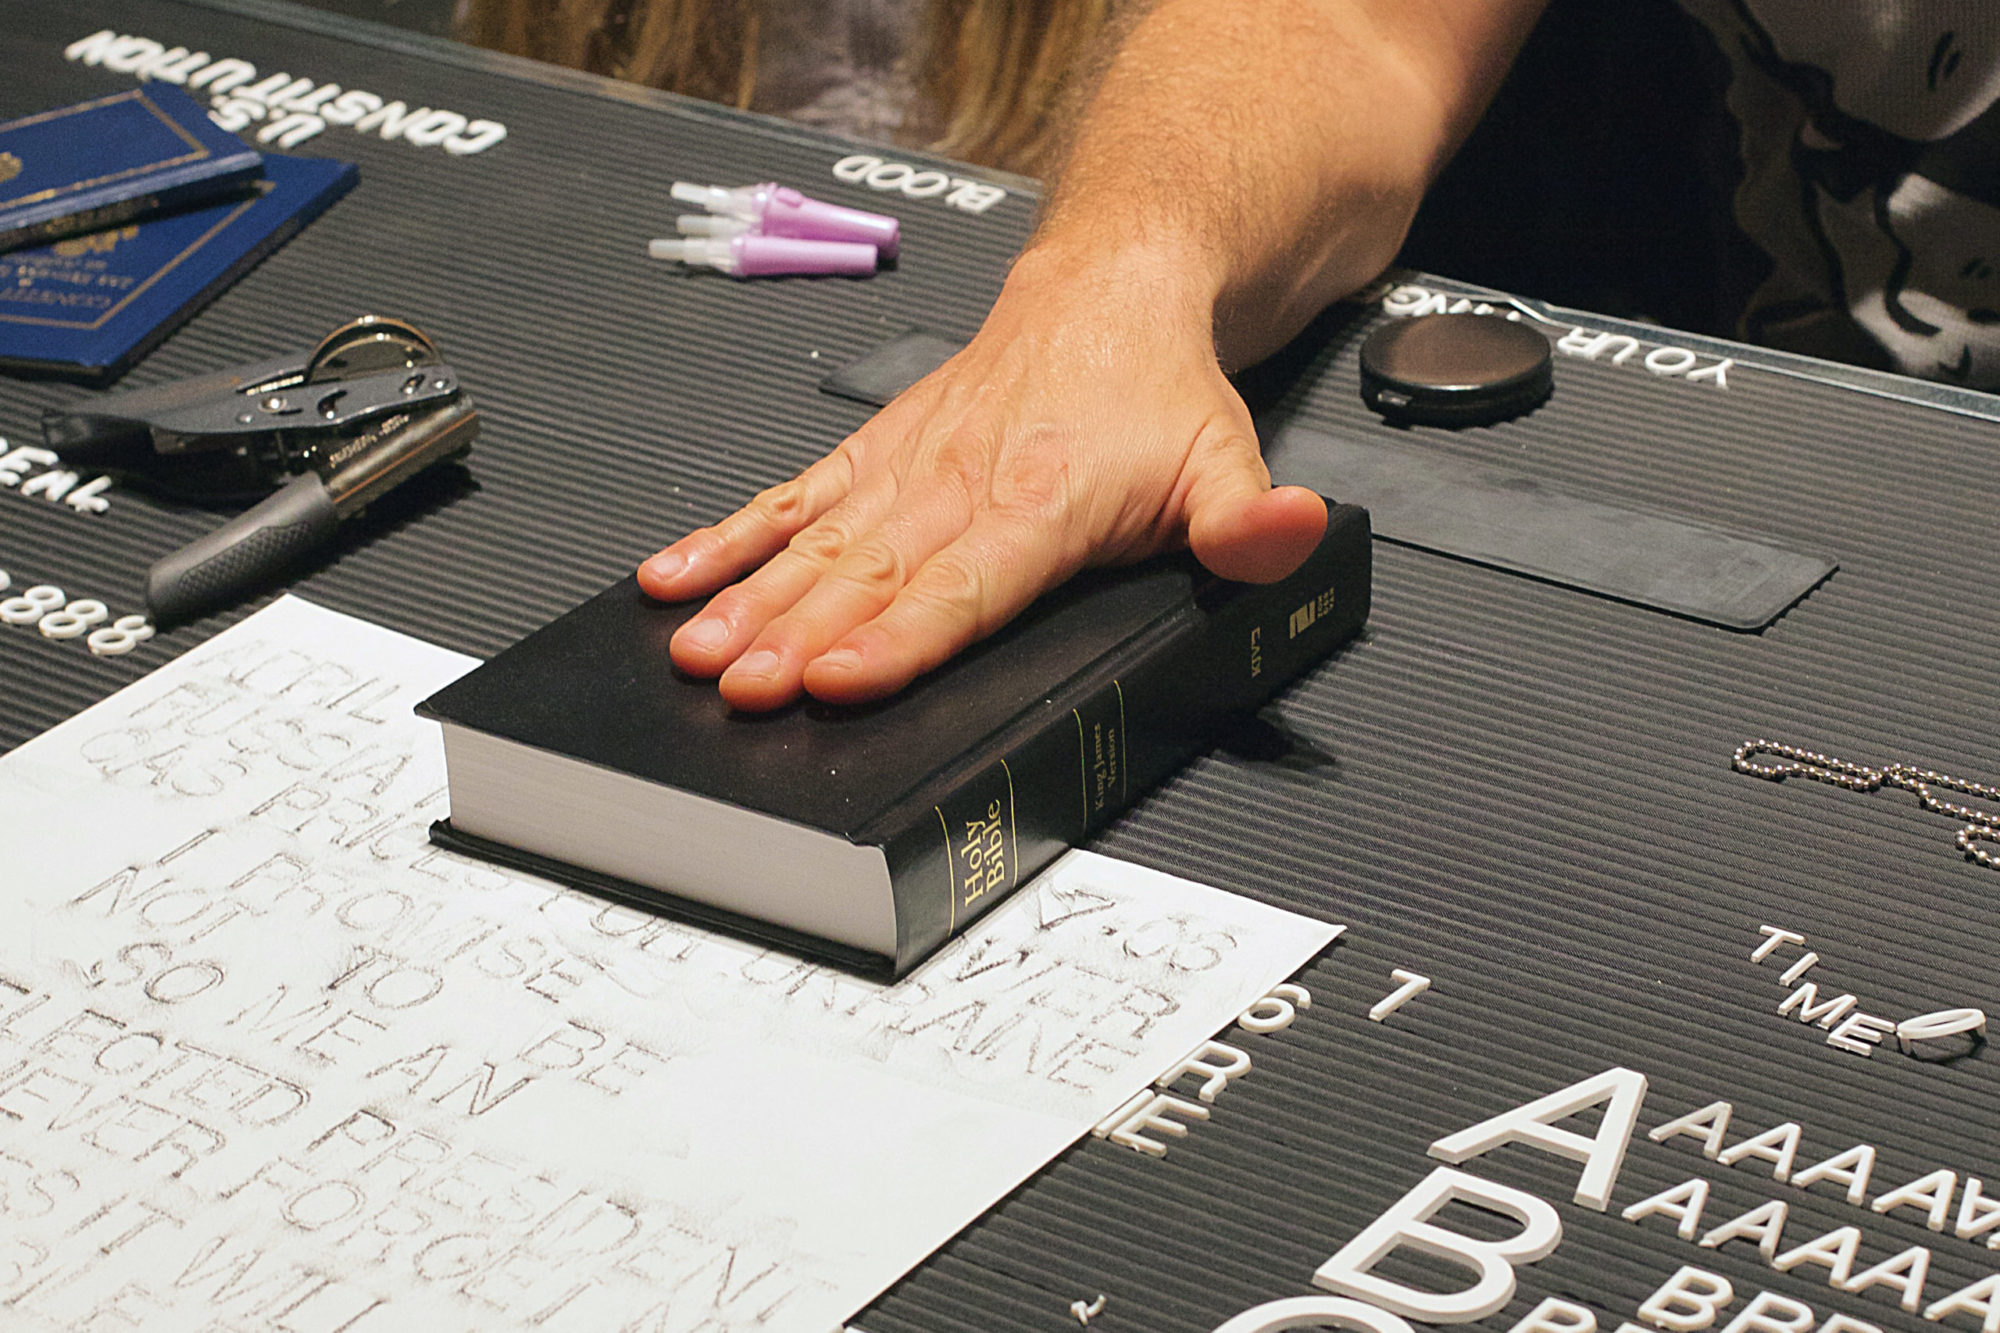 Close up of surface of black desk, Holy Bible rests on desk, a hand placed upon it